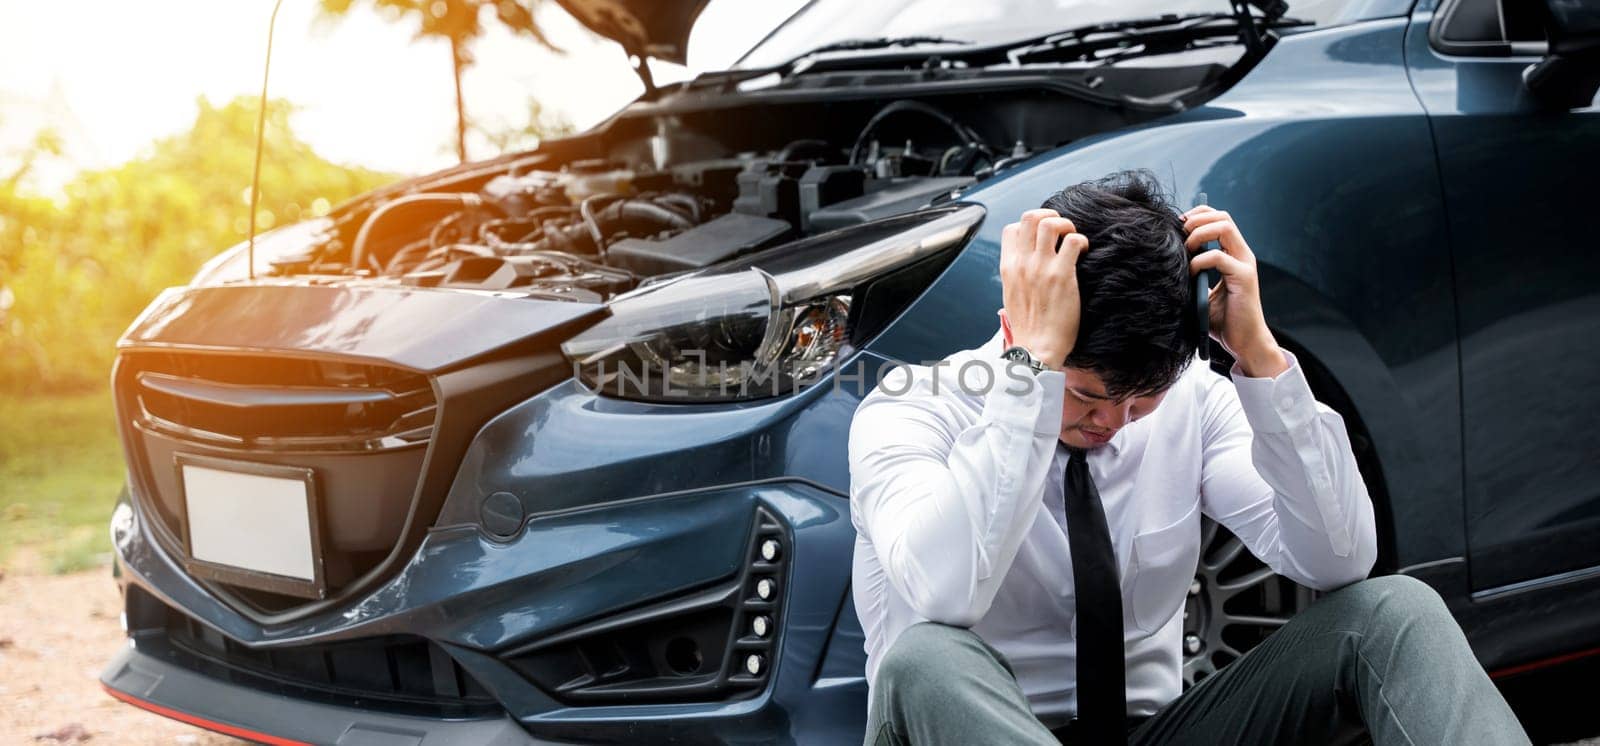 Worried man holding head by hands next to his broken car on rural road, calling for roadside assistance. Concept of car breakdown and frustration.